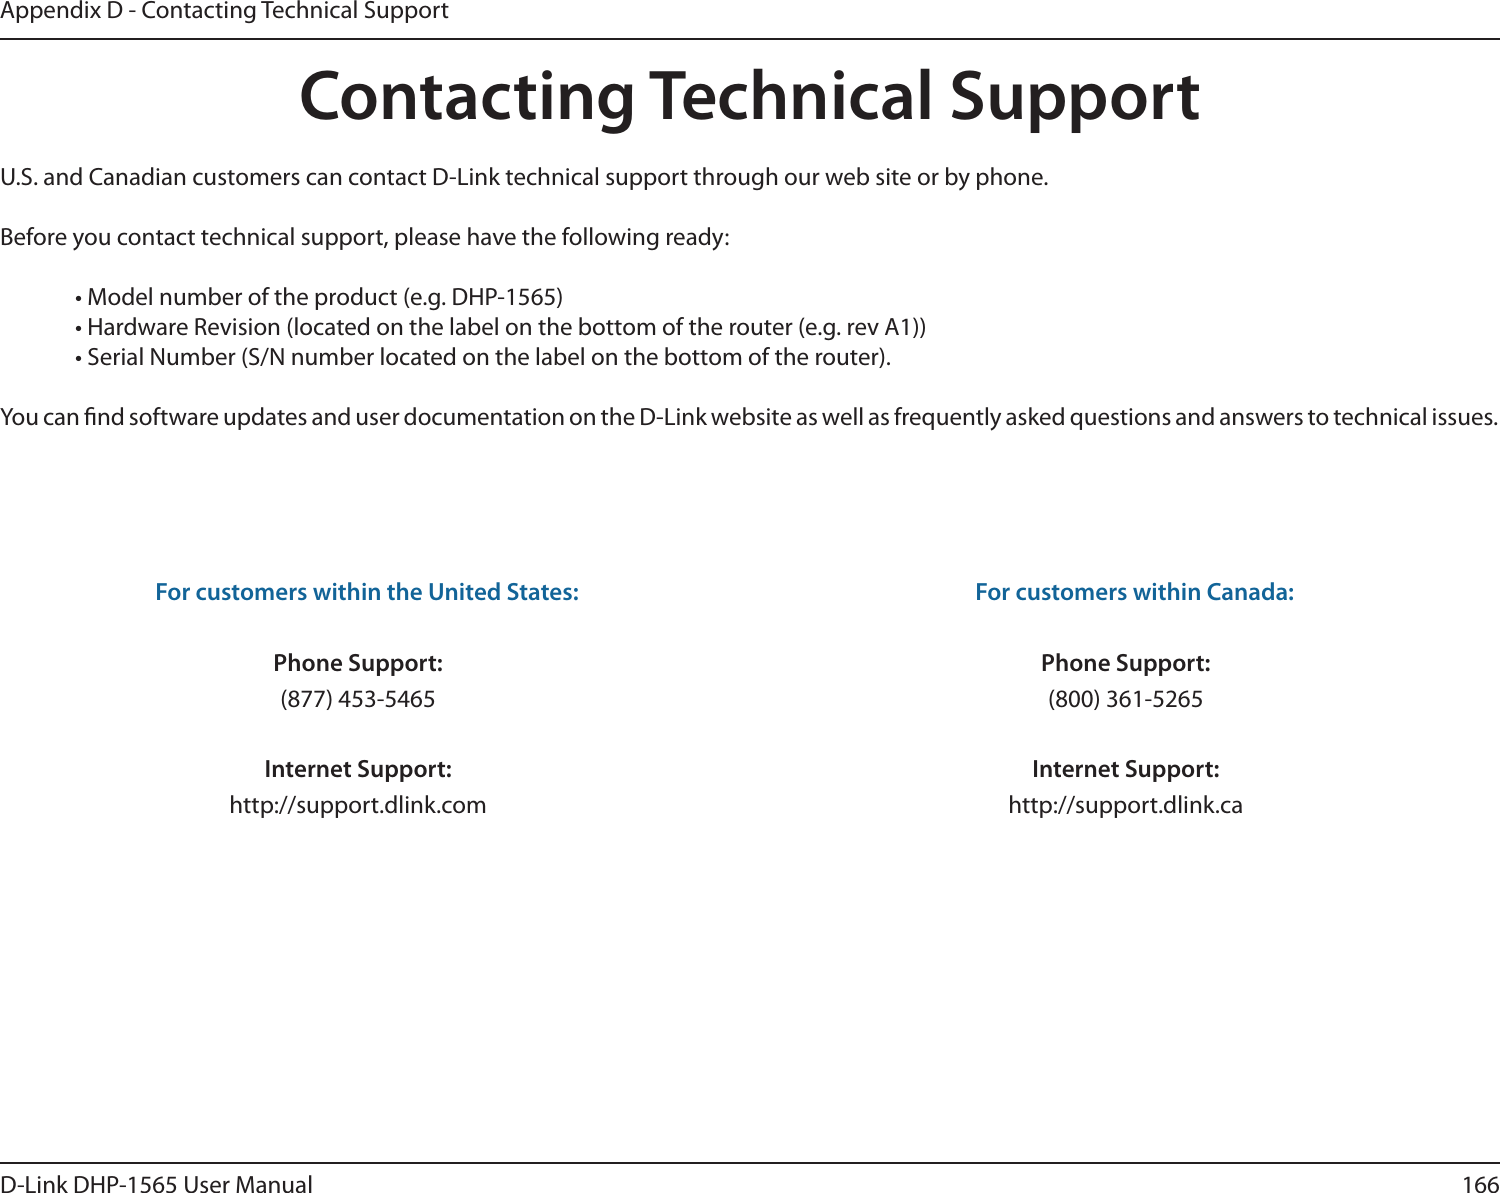 166D-Link DHP-1565 User ManualAppendix D - Contacting Technical SupportContacting Technical SupportU.S. and Canadian customers can contact D-Link technical support through our web site or by phone.Before you contact technical support, please have the following ready:  • Model number of the product (e.g. DHP-1565)  • Hardware Revision (located on the label on the bottom of the router (e.g. rev A1))  • Serial Number (S/N number located on the label on the bottom of the router). You can nd software updates and user documentation on the D-Link website as well as frequently asked questions and answers to technical issues.For customers within the United States: Phone Support:(877) 453-5465Internet Support:http://support.dlink.com For customers within Canada: Phone Support:(800) 361-5265Internet Support:http://support.dlink.ca 